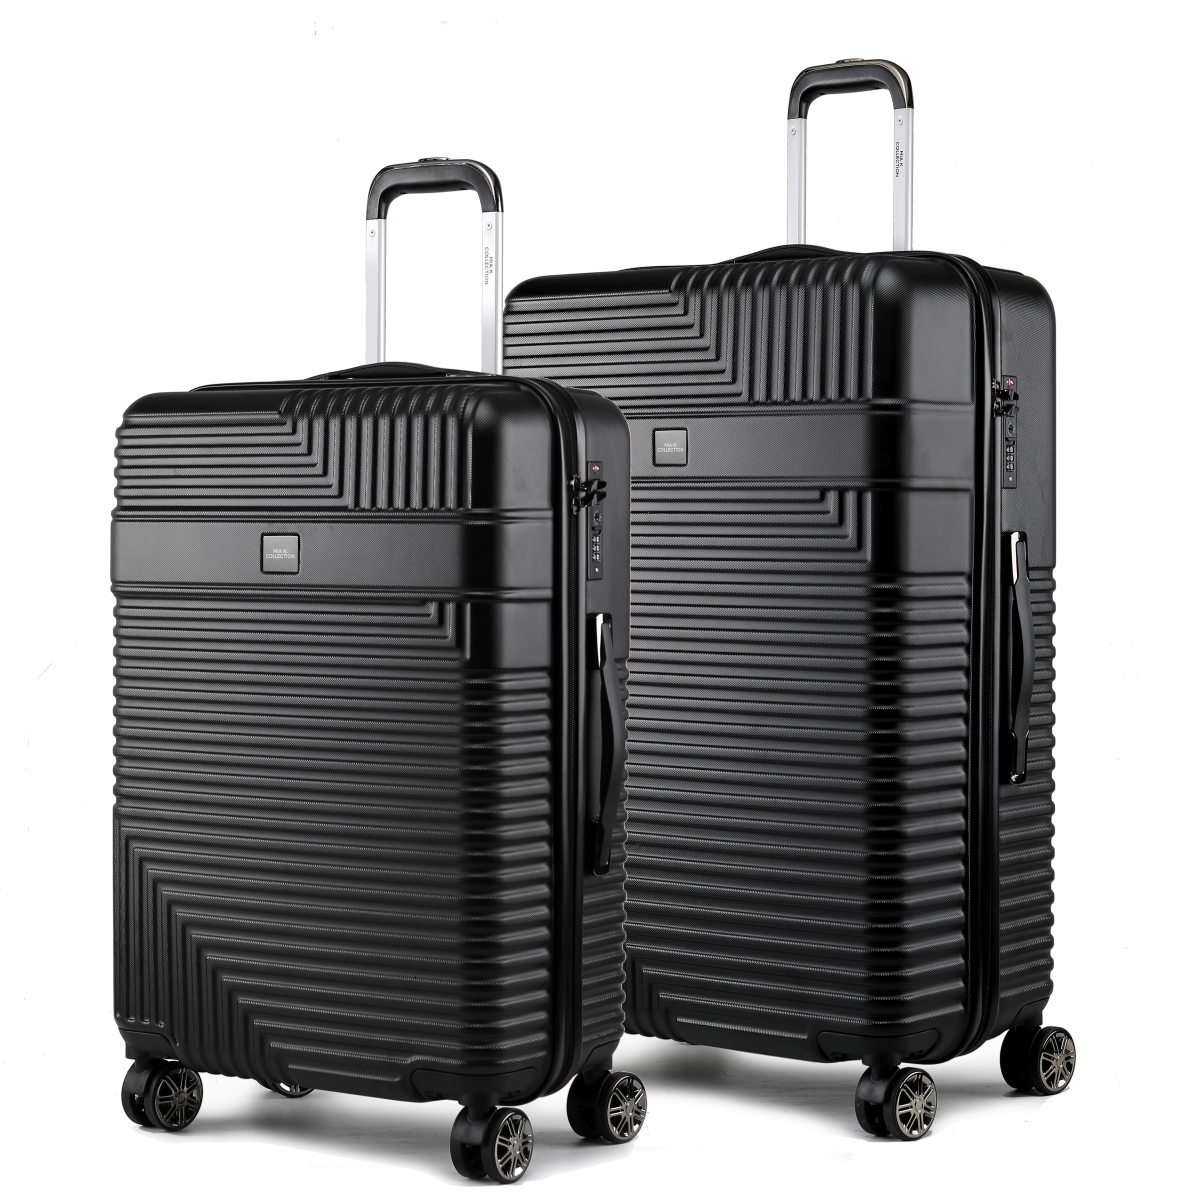 Picture of MKF Collection by Mia K. MKF-F222BK-L-XL Mykonos Luggage Set-Extra Large and Large - 2 pieces